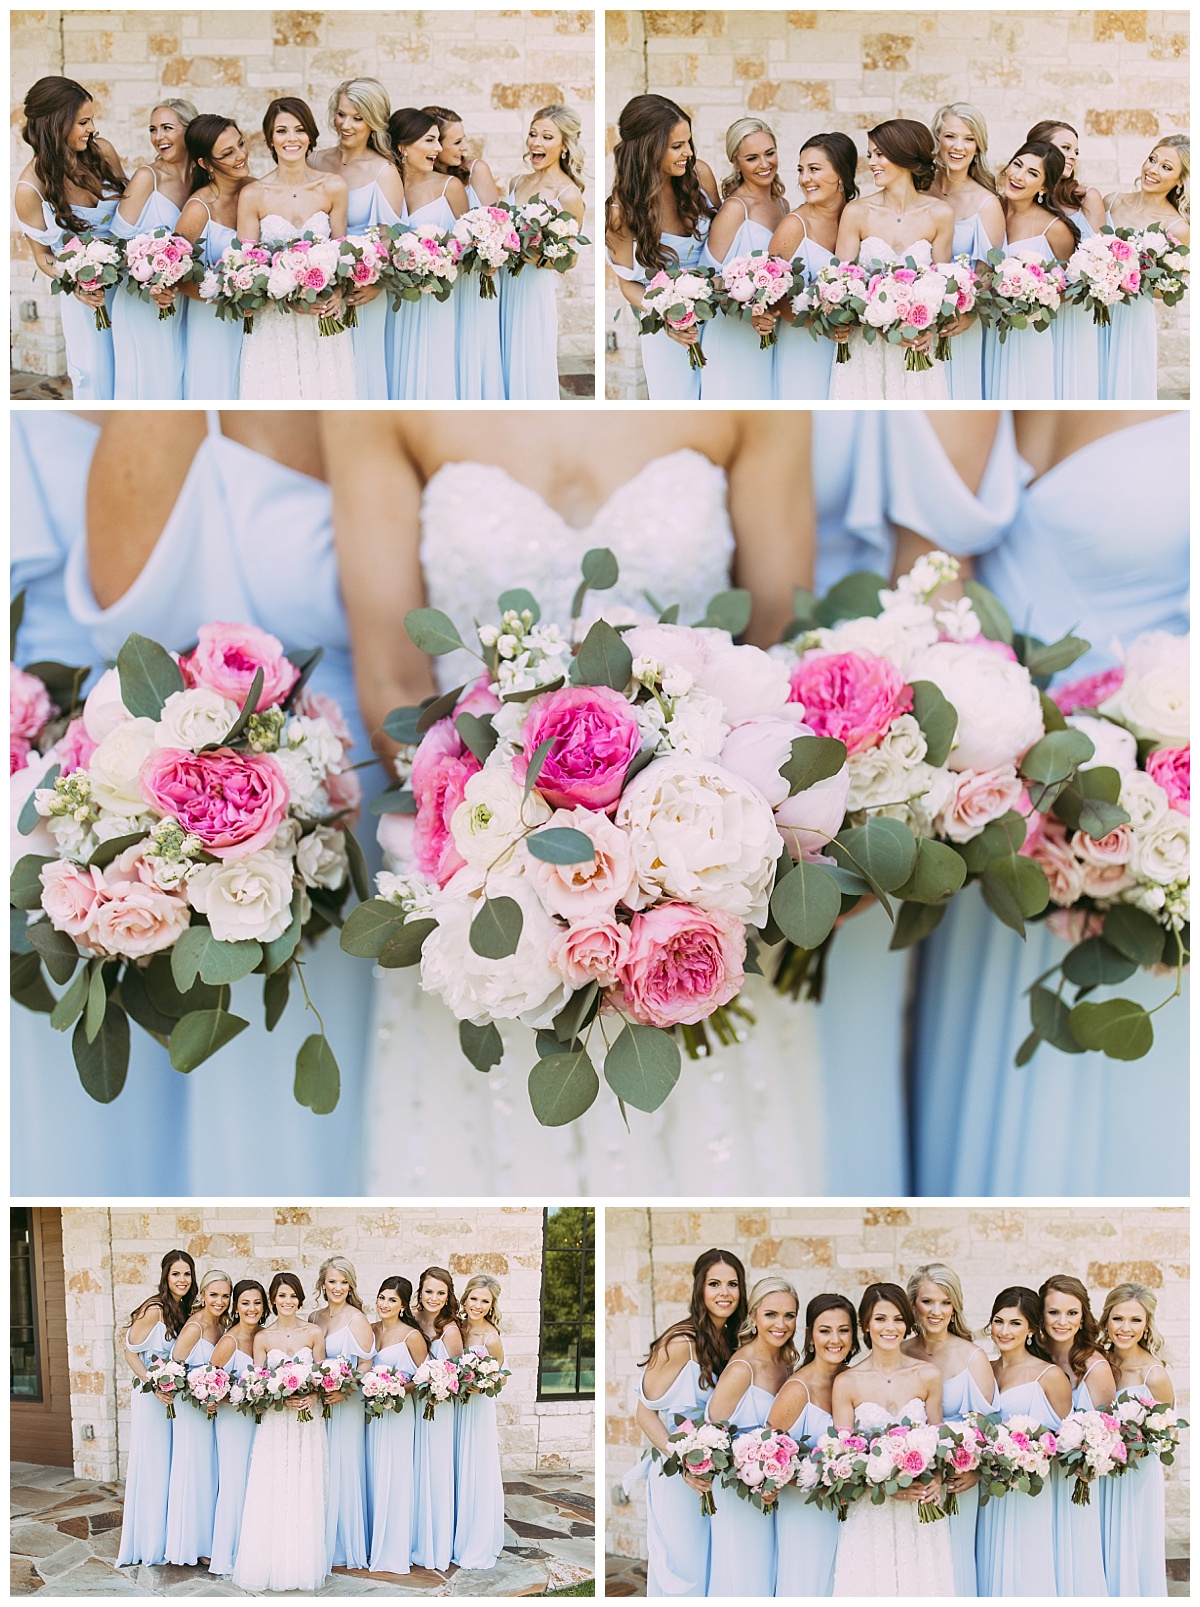 Dallas Wedding, Plano Wedding, Fort Worth Wedding, The Laurel Wedding, Summer Wedding, Spring Wedding, Wedding Flowers, white and pink flowers, traditional wedding Flowers,  A & L Floral Design